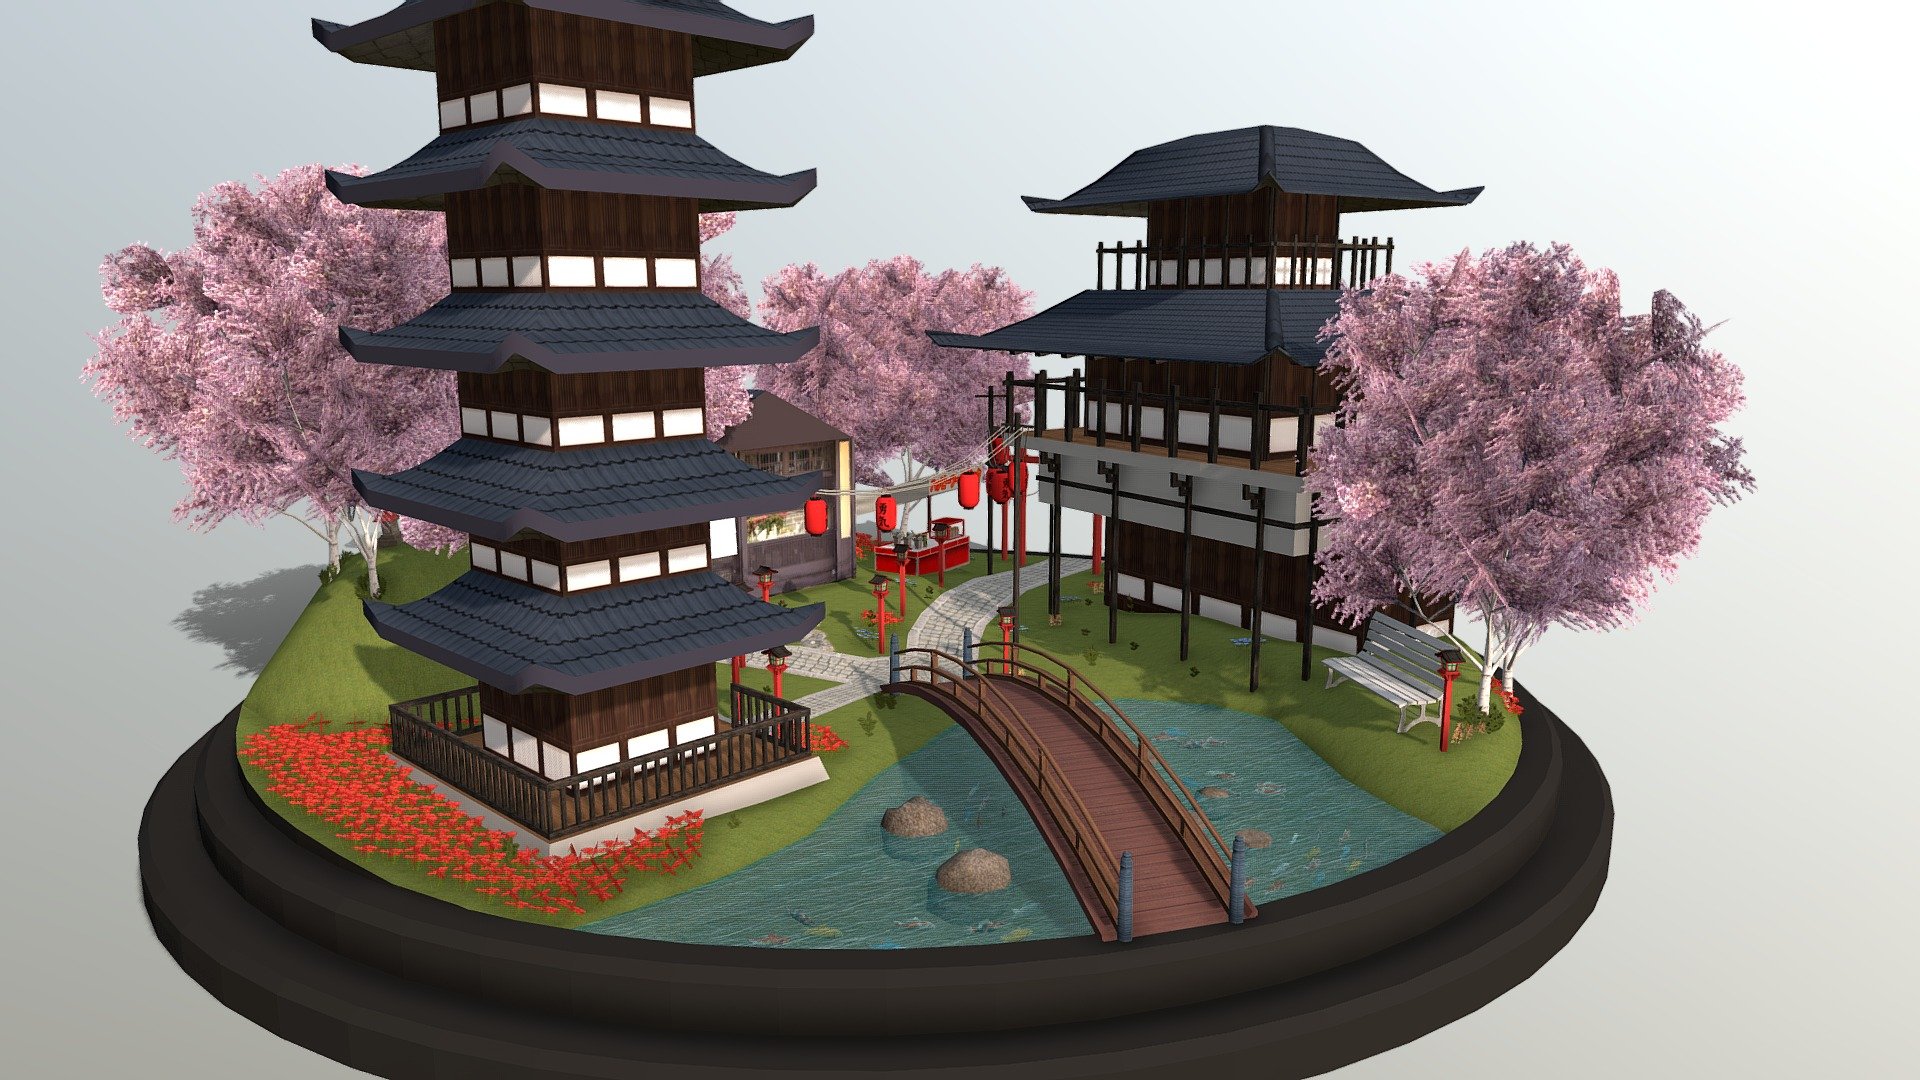 My small version of kyoto japan.

This is my end asignment for Digital Arts and Entertainment 2020 3d model